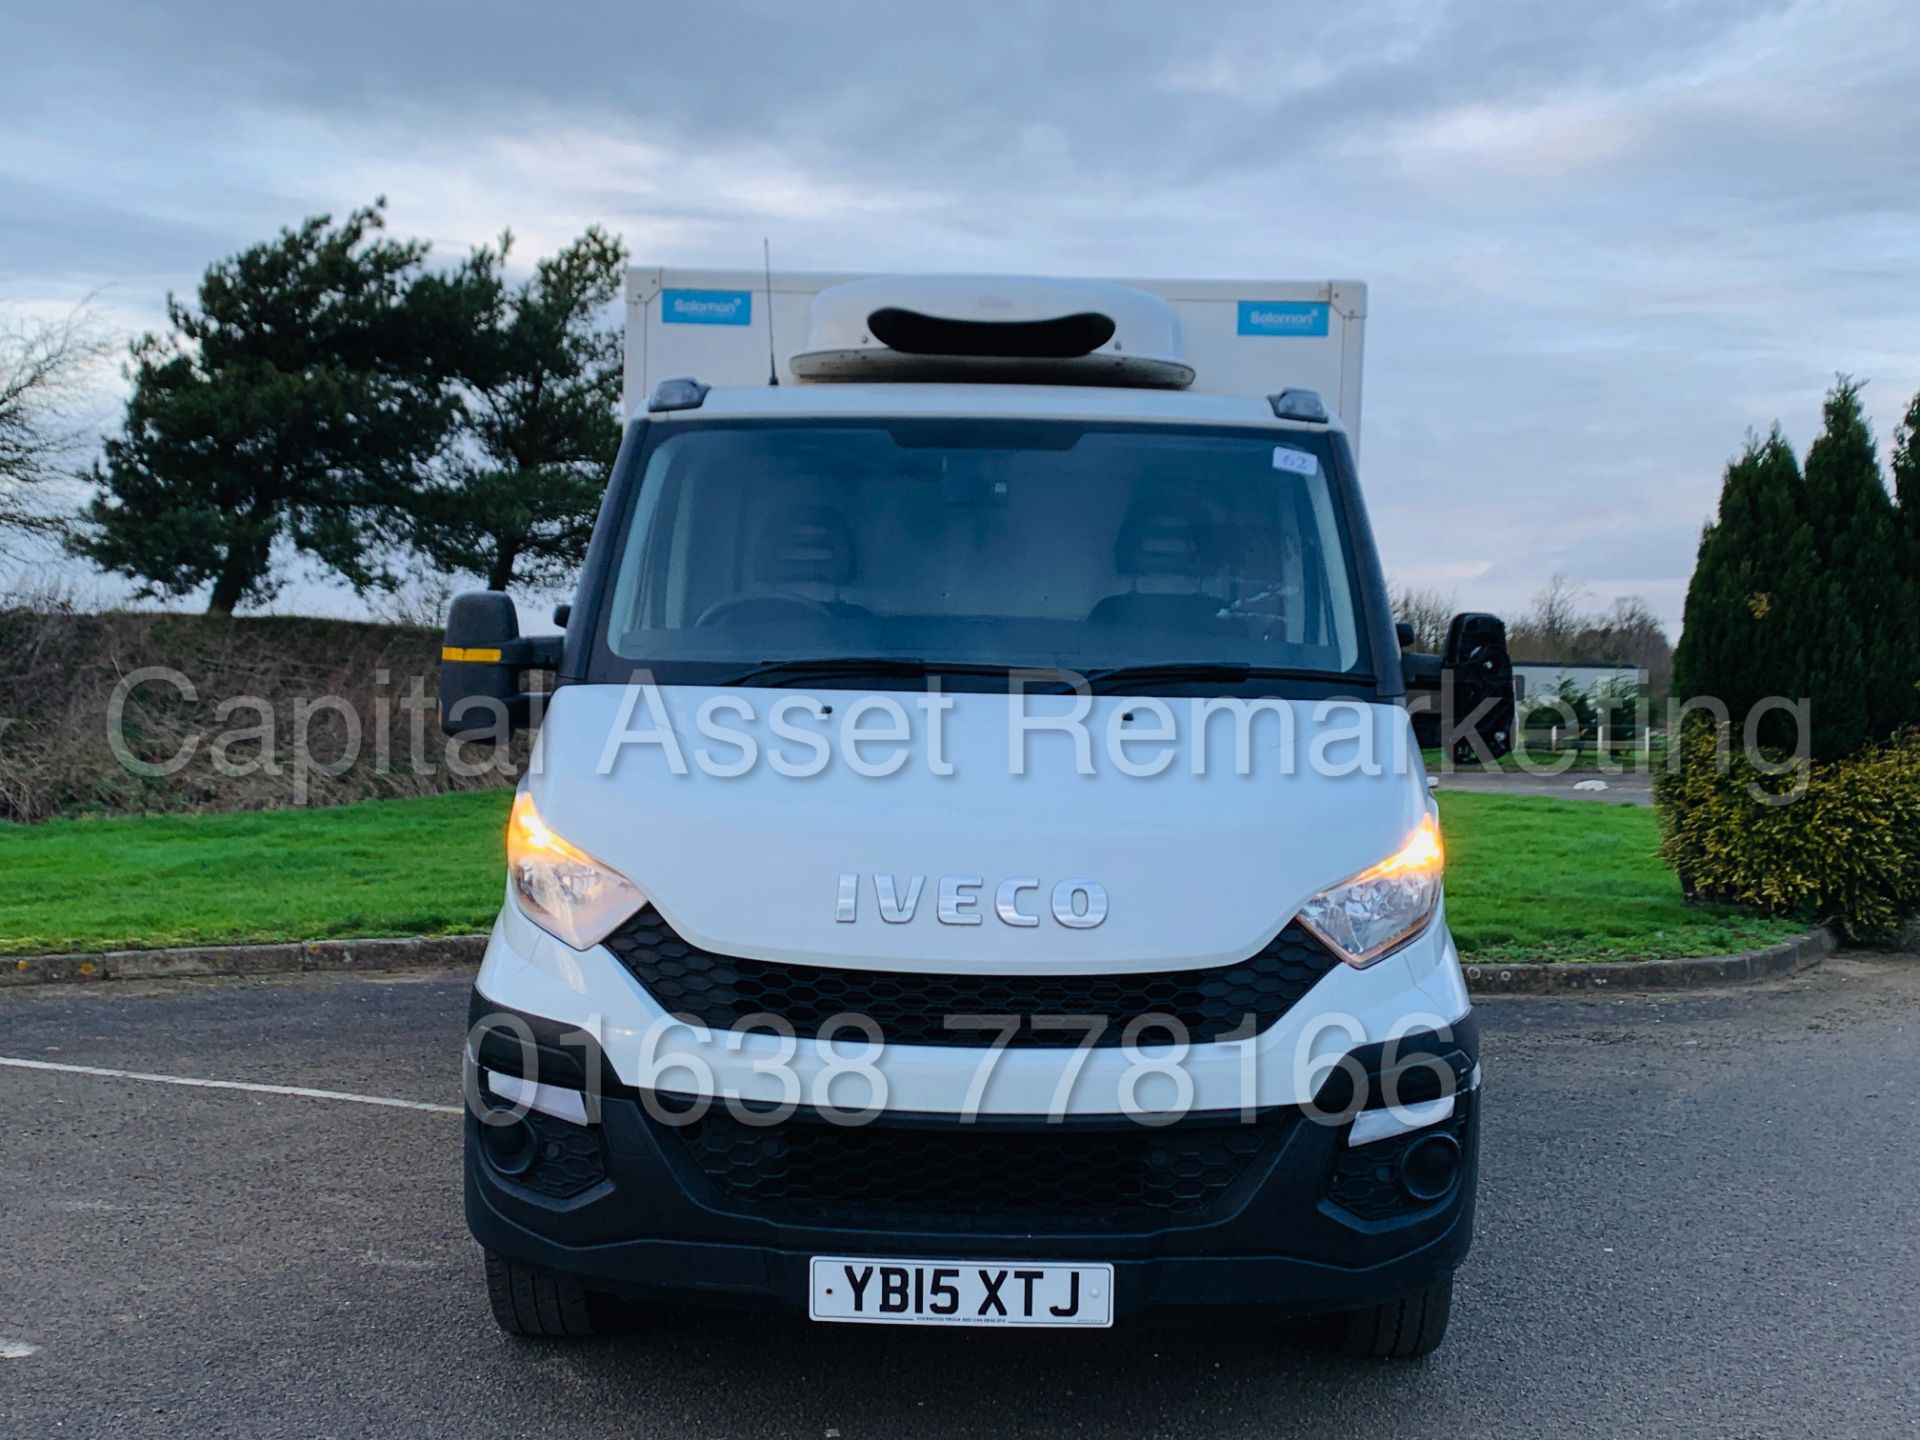 (On Sale) IVECO DAILY 35S11 *LWB - REFRIGERATED BOX* (2015 - NEW MODEL) '2.3 DIESEL - 8 SPEED AUTO' - Image 4 of 39